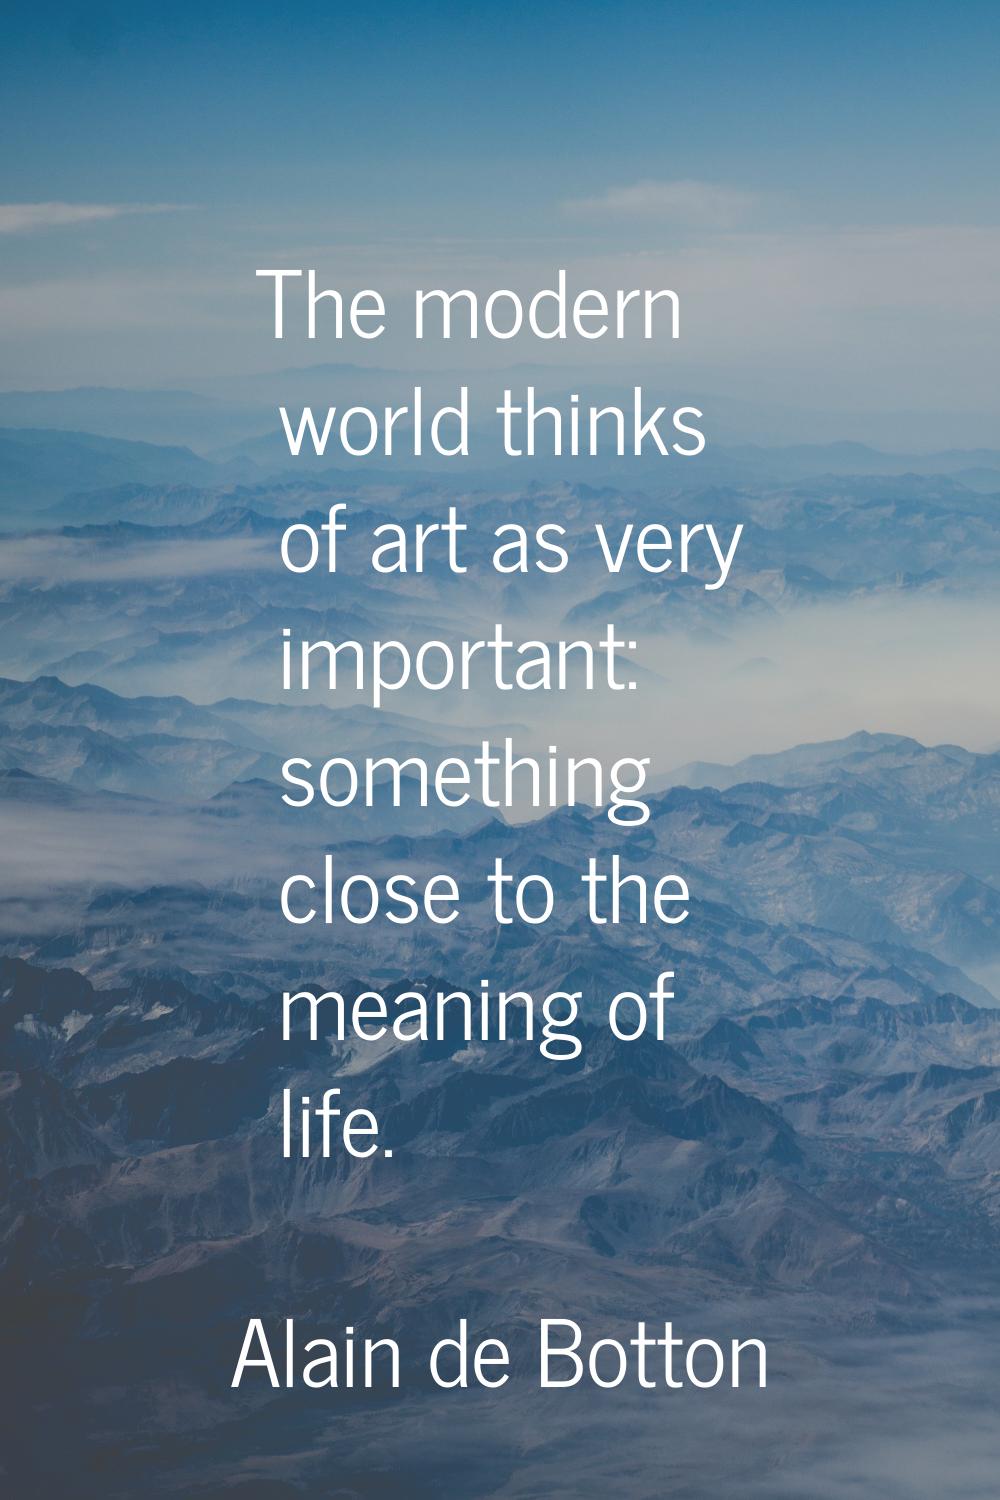 The modern world thinks of art as very important: something close to the meaning of life.